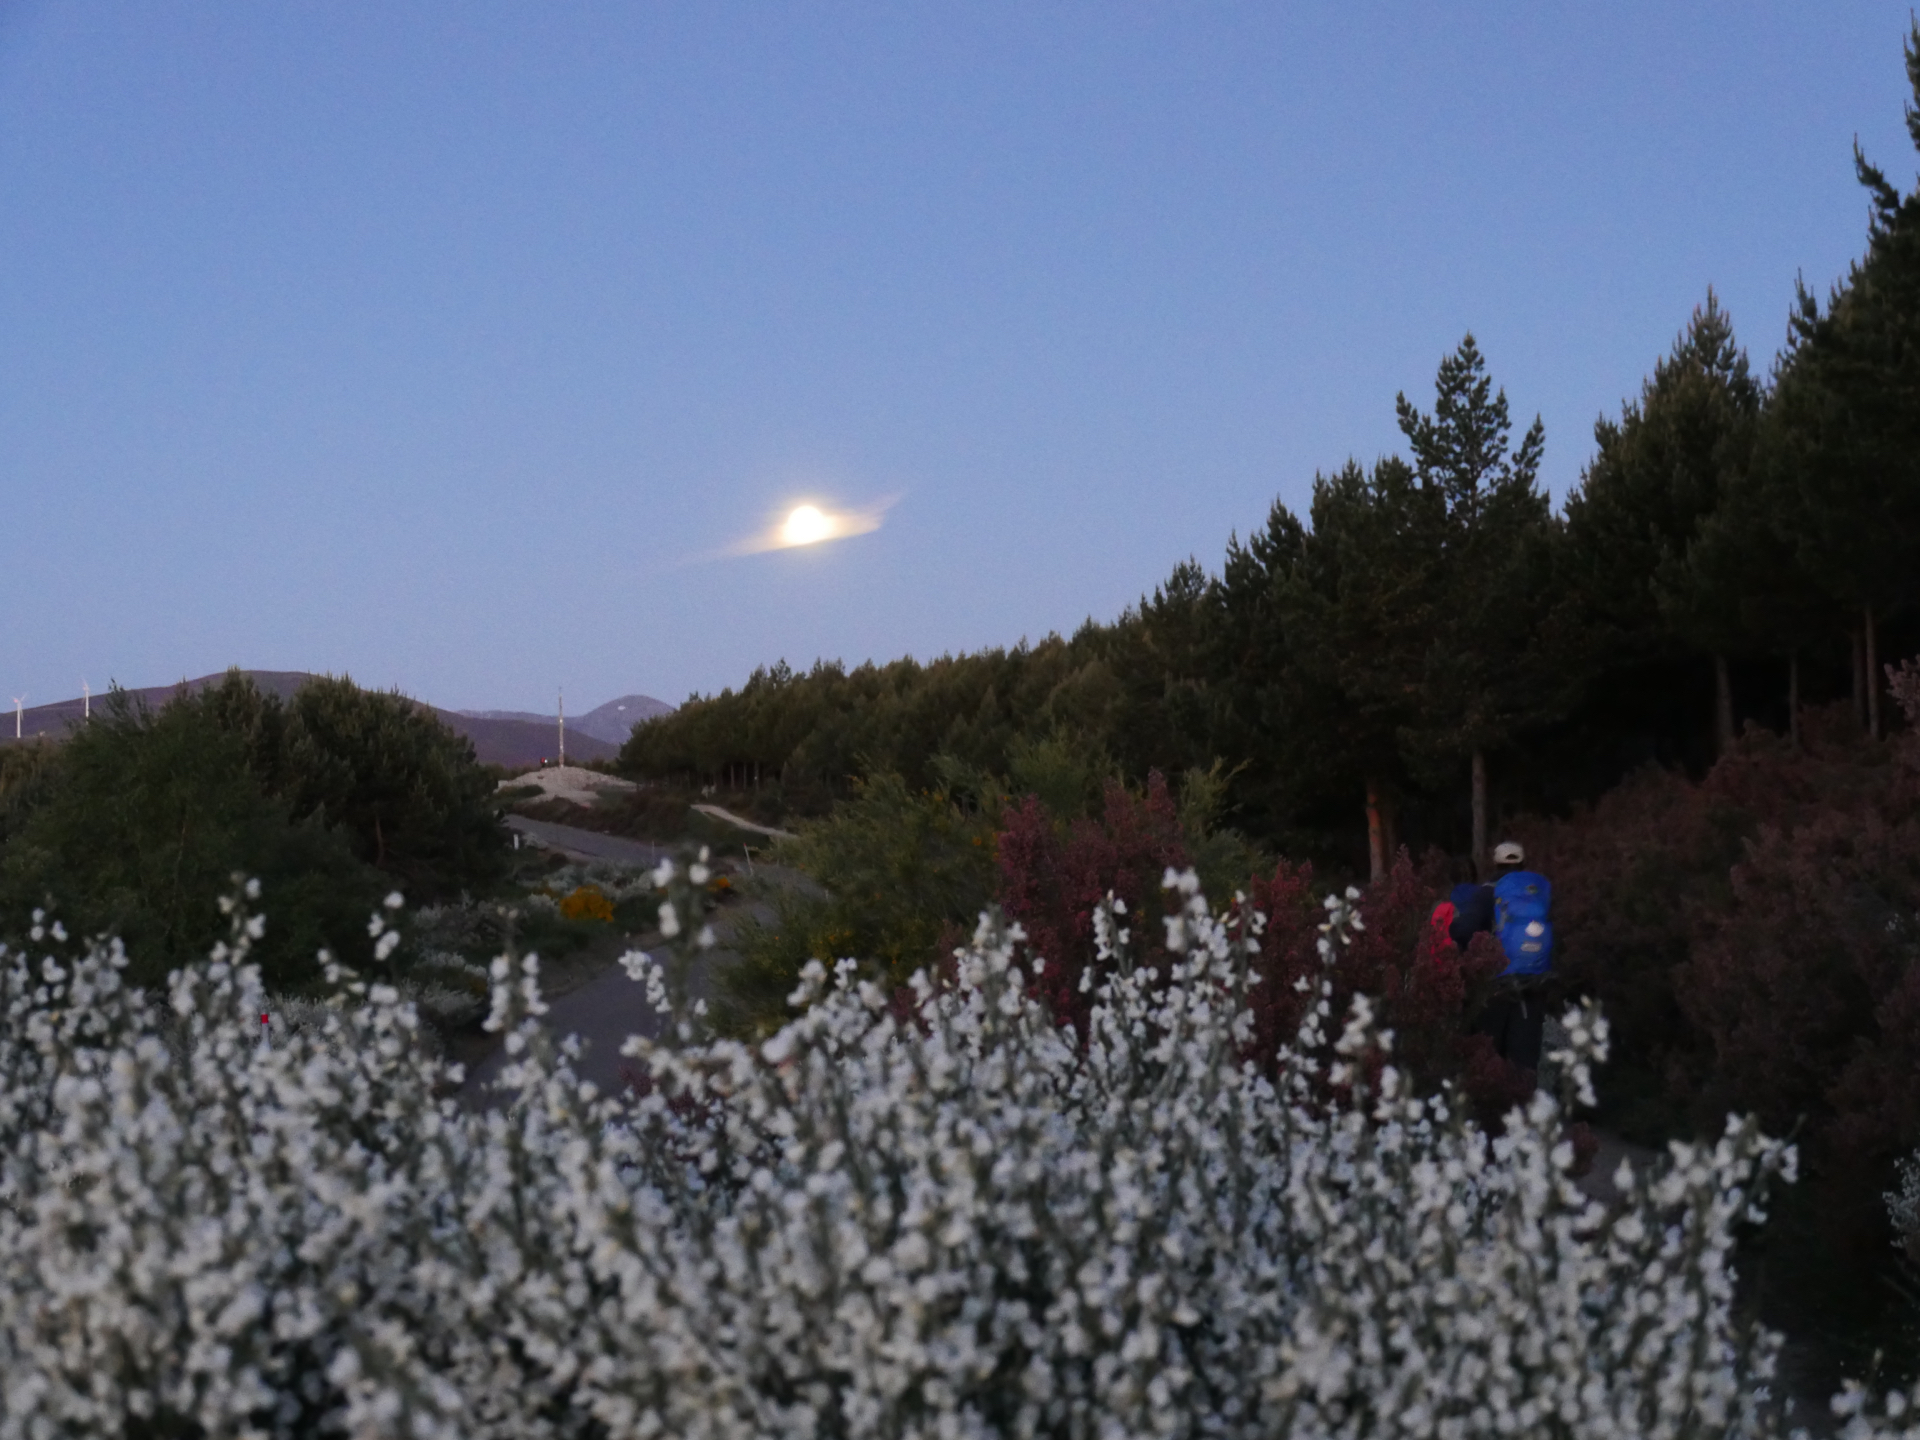 A single cloud sits in front of a full moon above Cruz Ferro, near the high point of the Camino de Santiago.